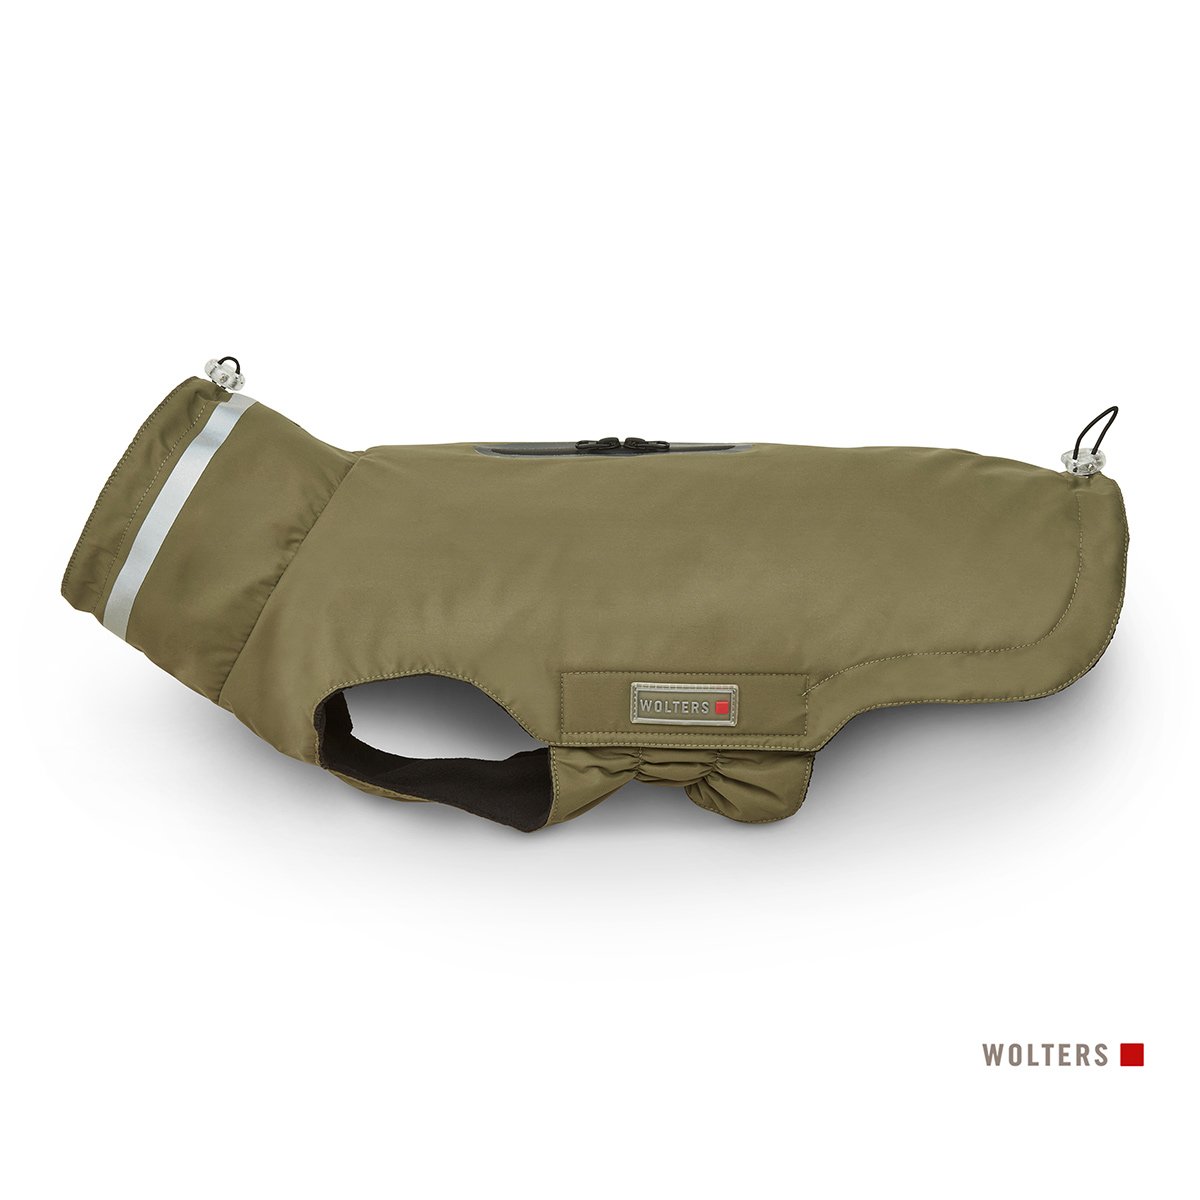 Wolters Outdoorjacke Modern Classic olive 40 cm von Wolters Cat&Dog